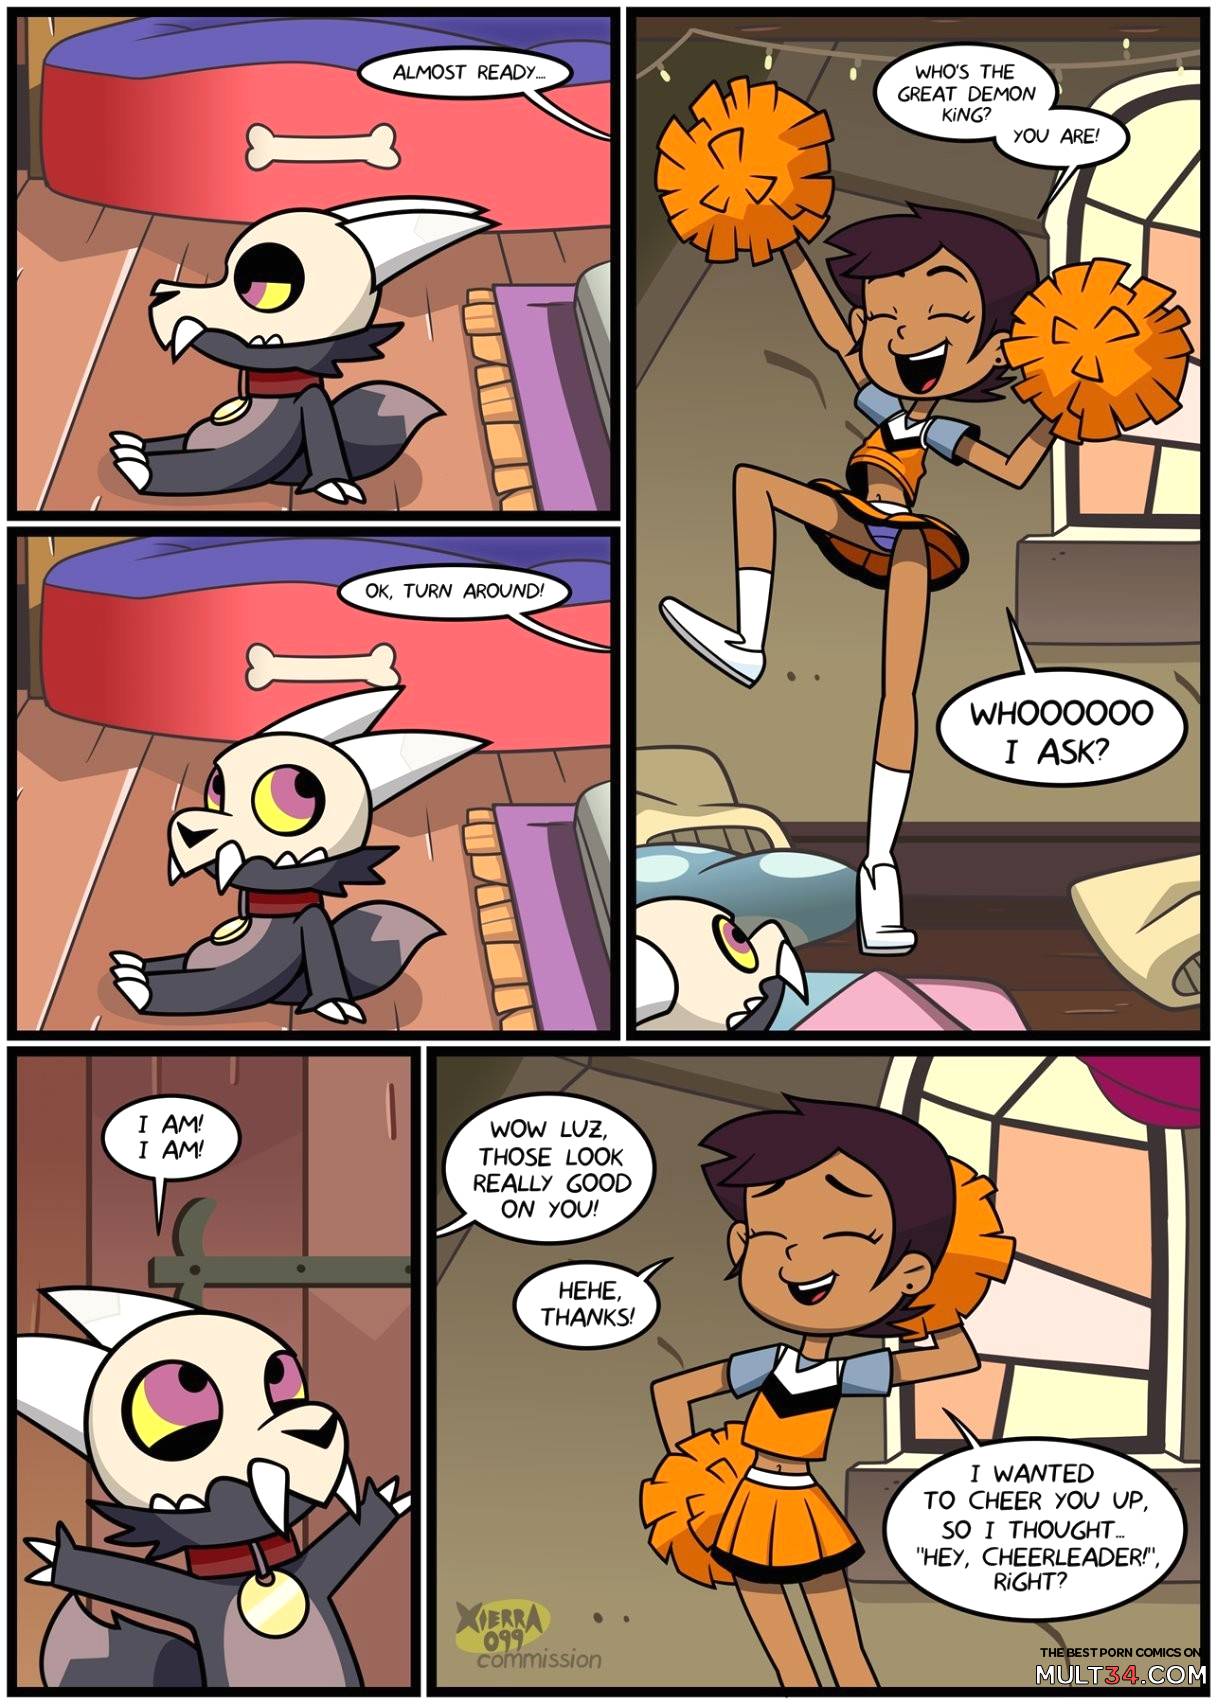 The Owl house - After Dark: King's Cheer up/Dress up party page 3